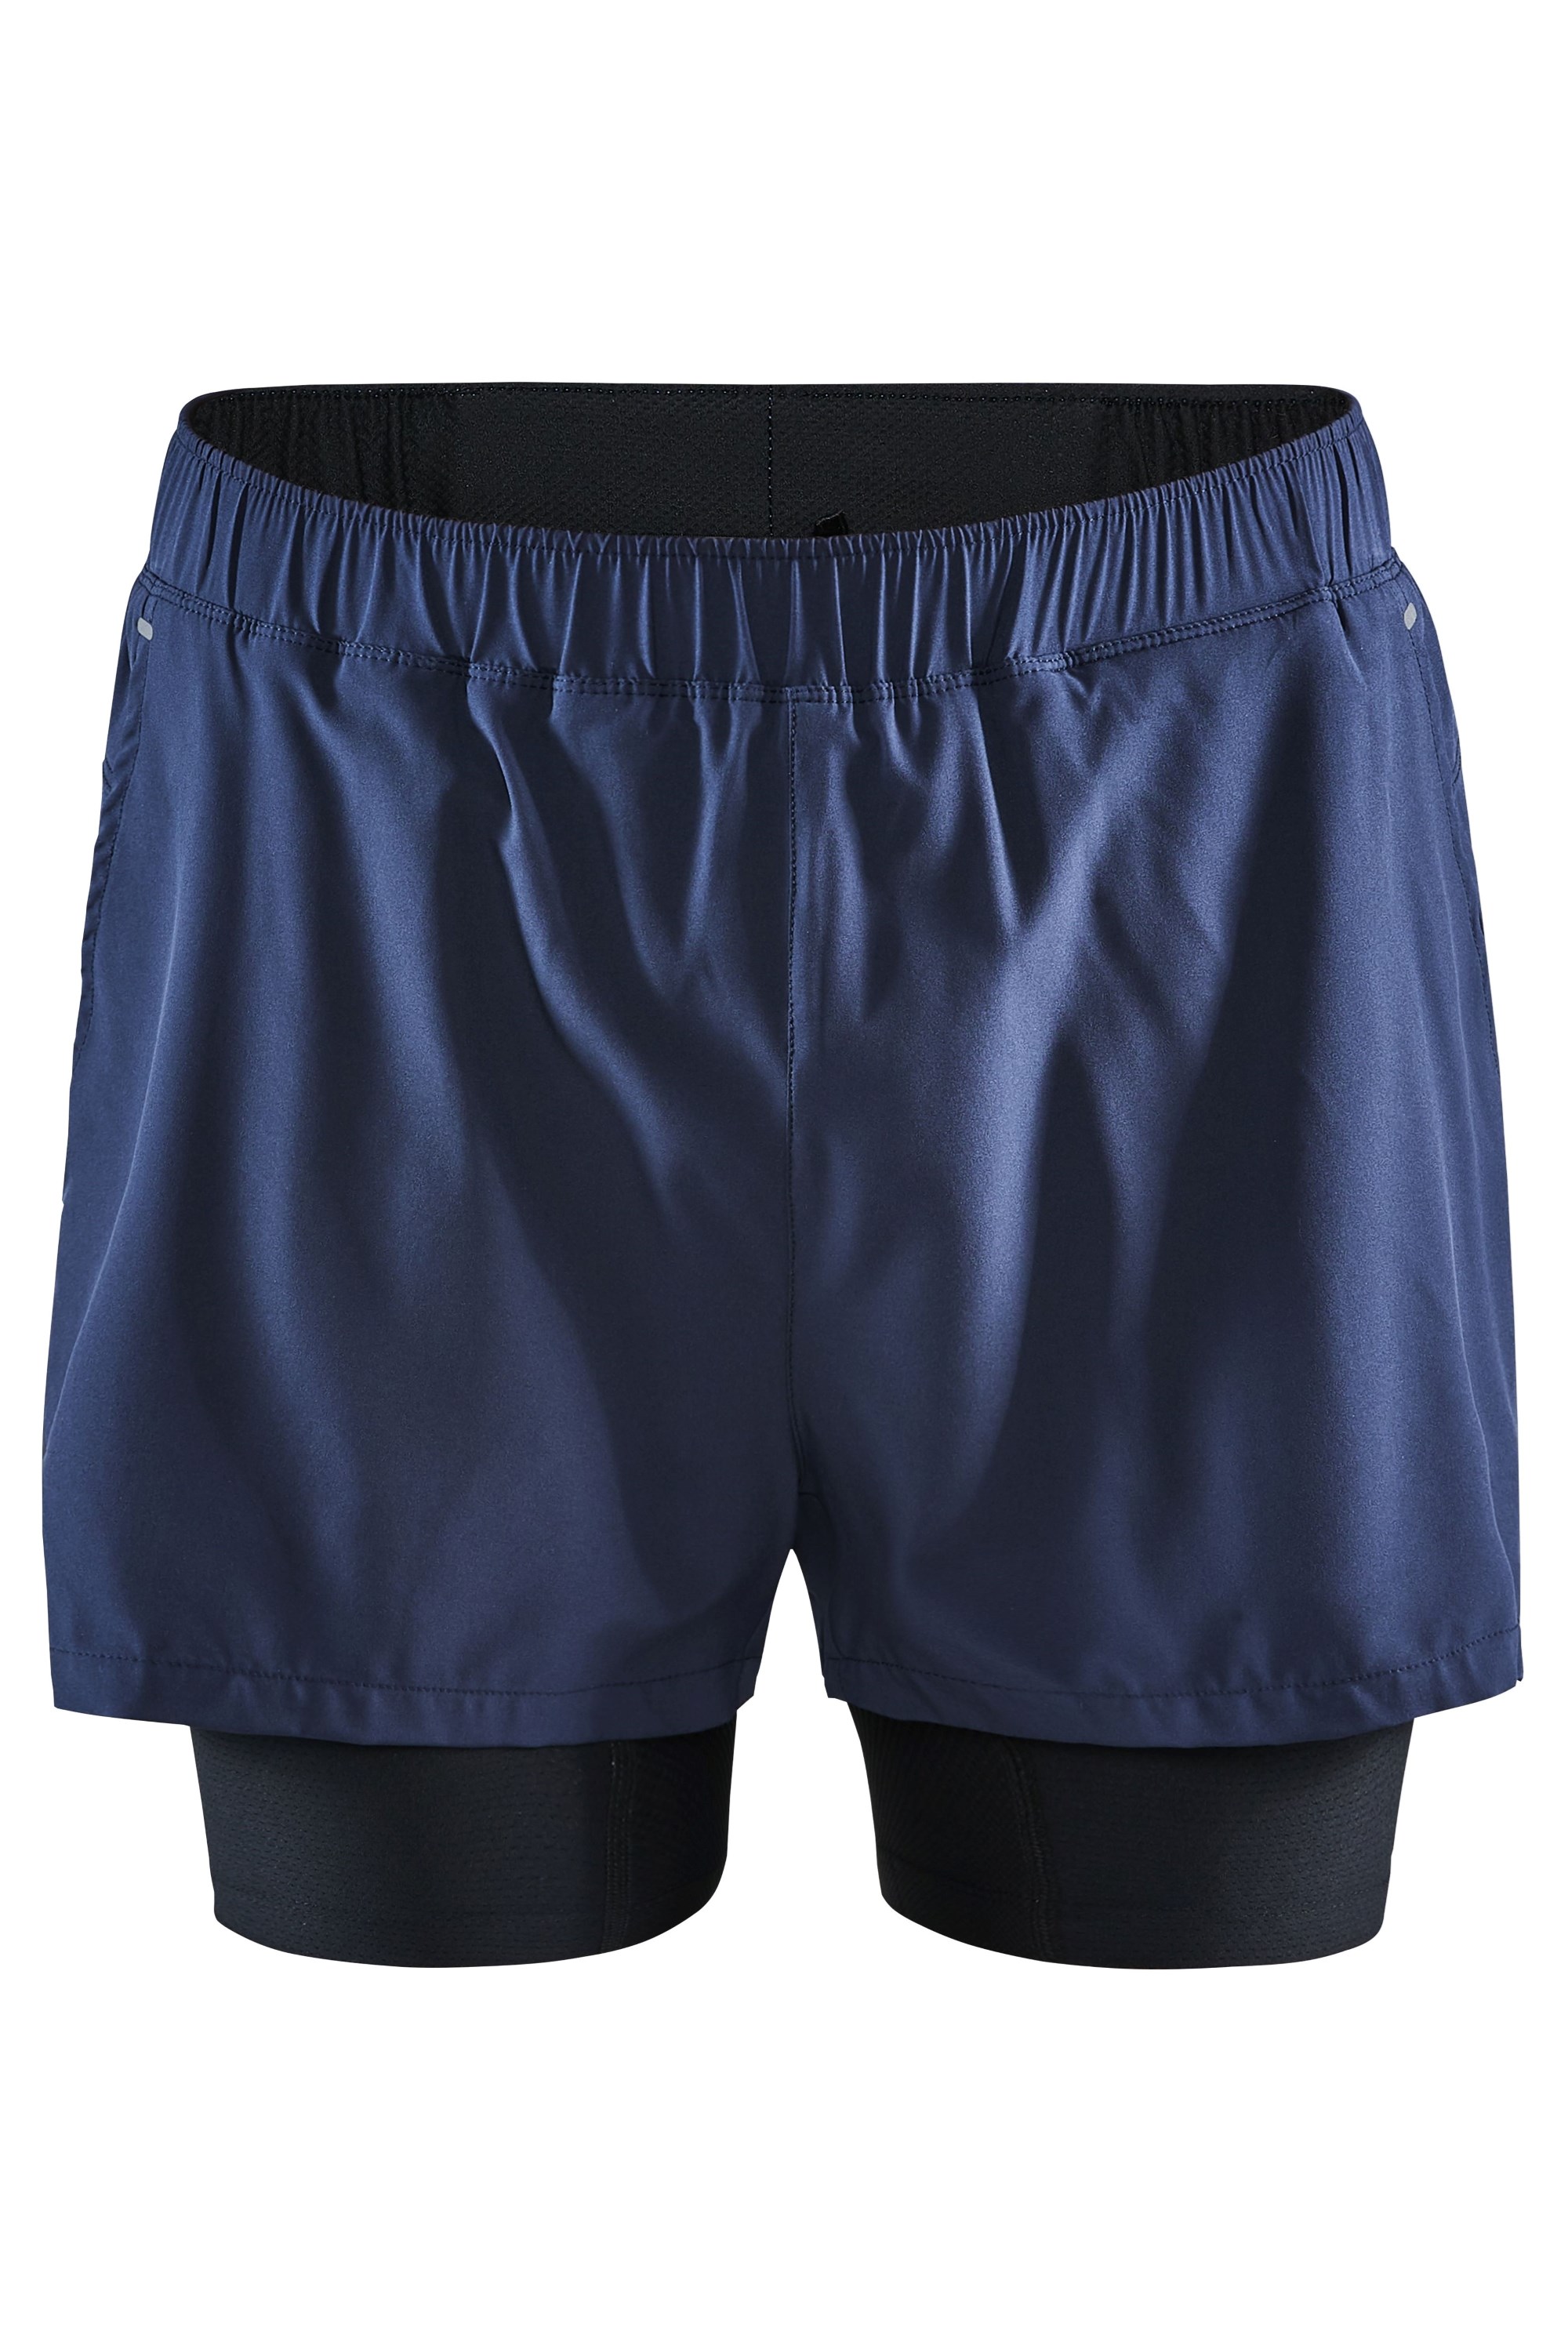 Advance Essence Mens 2 In 1 Stretch Shorts -